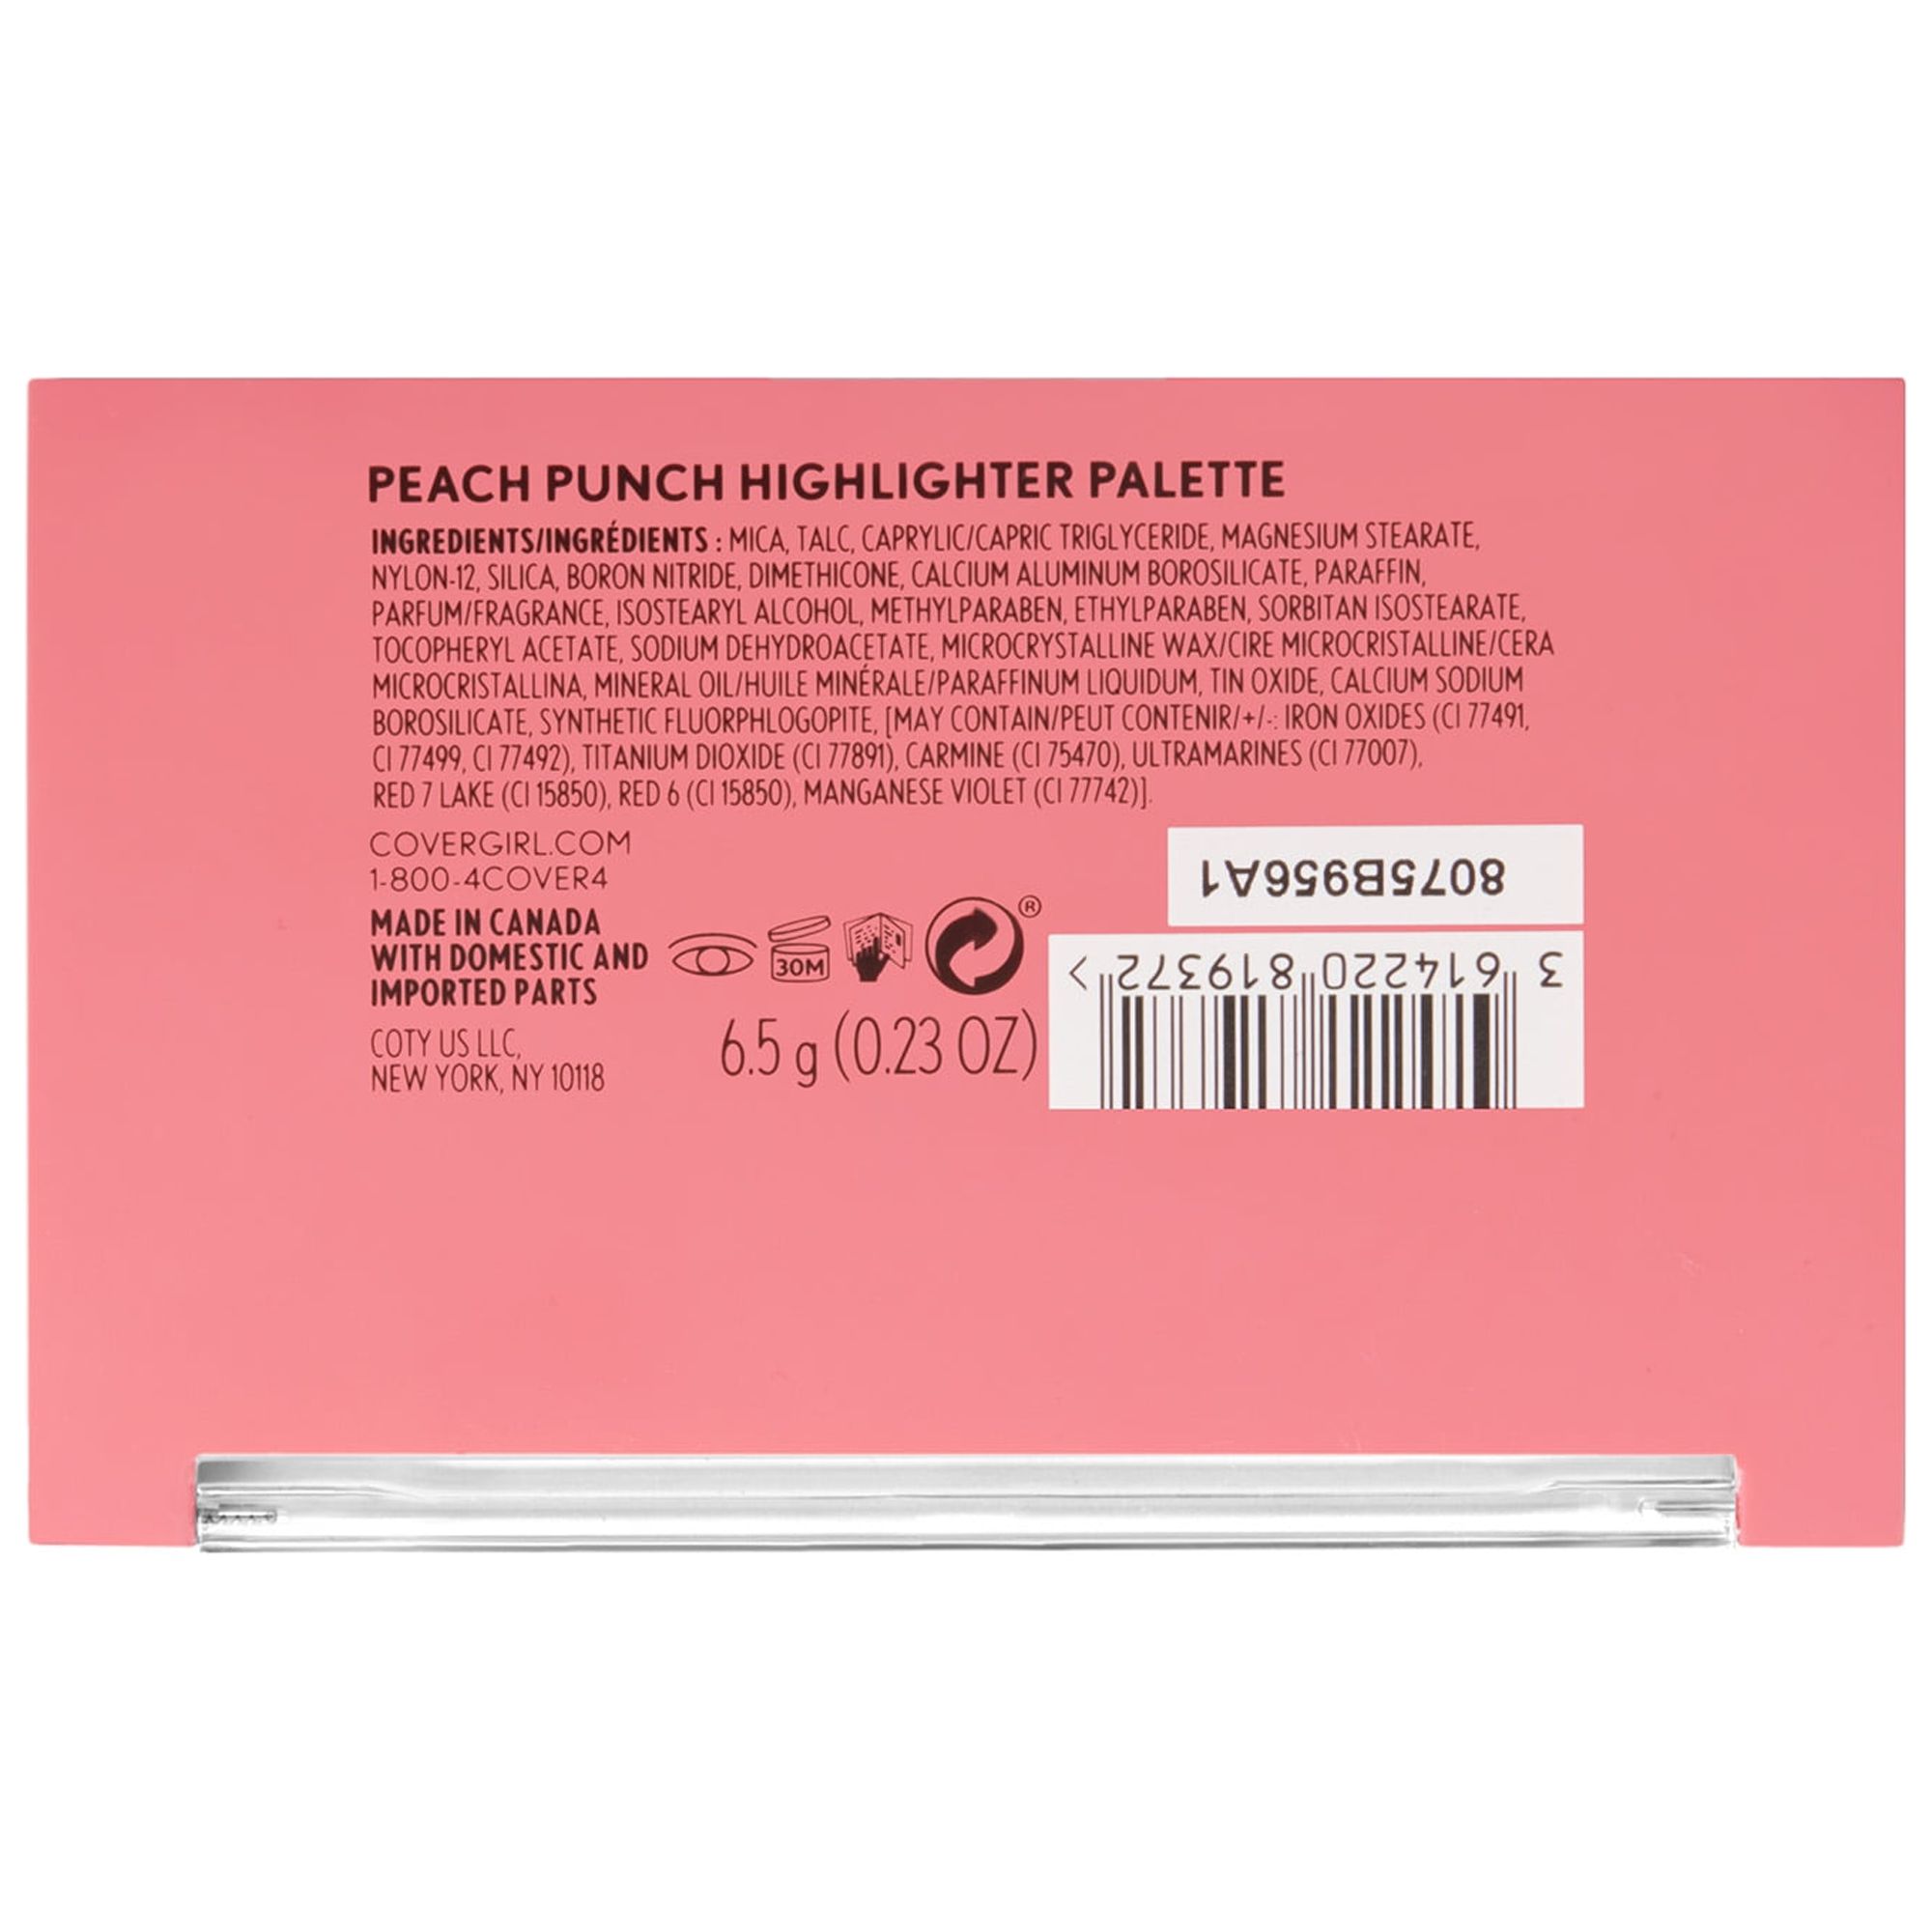 COVERGIRL Peach Scented Collection, Peach Punch Highlighter Palette - image 3 of 4